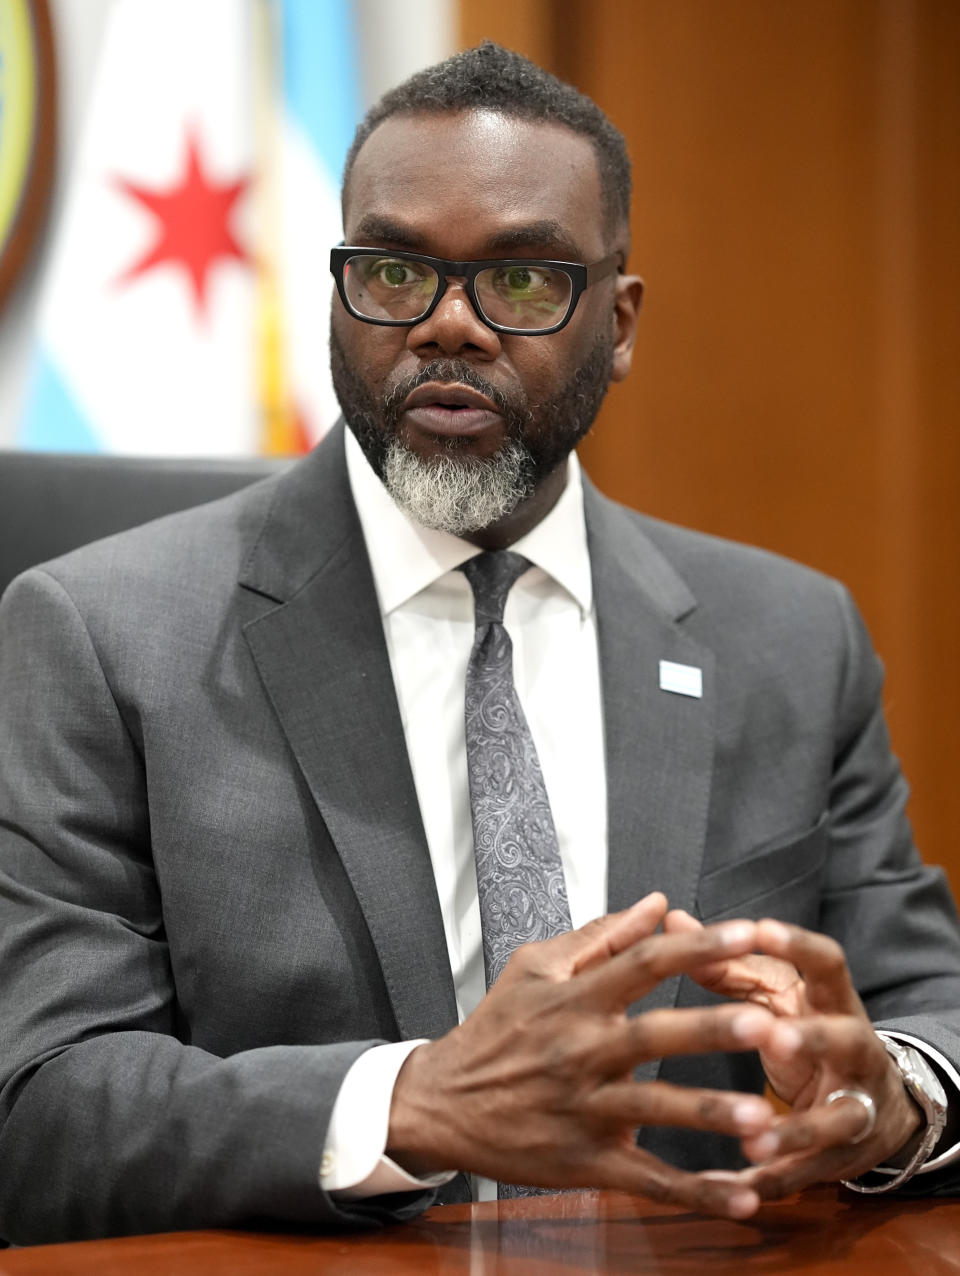 Chicago Mayor Brandon Johnson responds to a question in his City Hall office during an interview with The Associated Press Monday, May 6, 2024, in Chicago. The rookie mayor's bumpy first year has been a test of his progressive credentials. He's navigated an evolving migrant crisis, budget gaps, persistent crime and a troubled transit system to name a few. While there have been wins for workers and social services, he's struggled with businesses, police and fellow Democrats. (AP Photo/Charles Rex Arbogast)